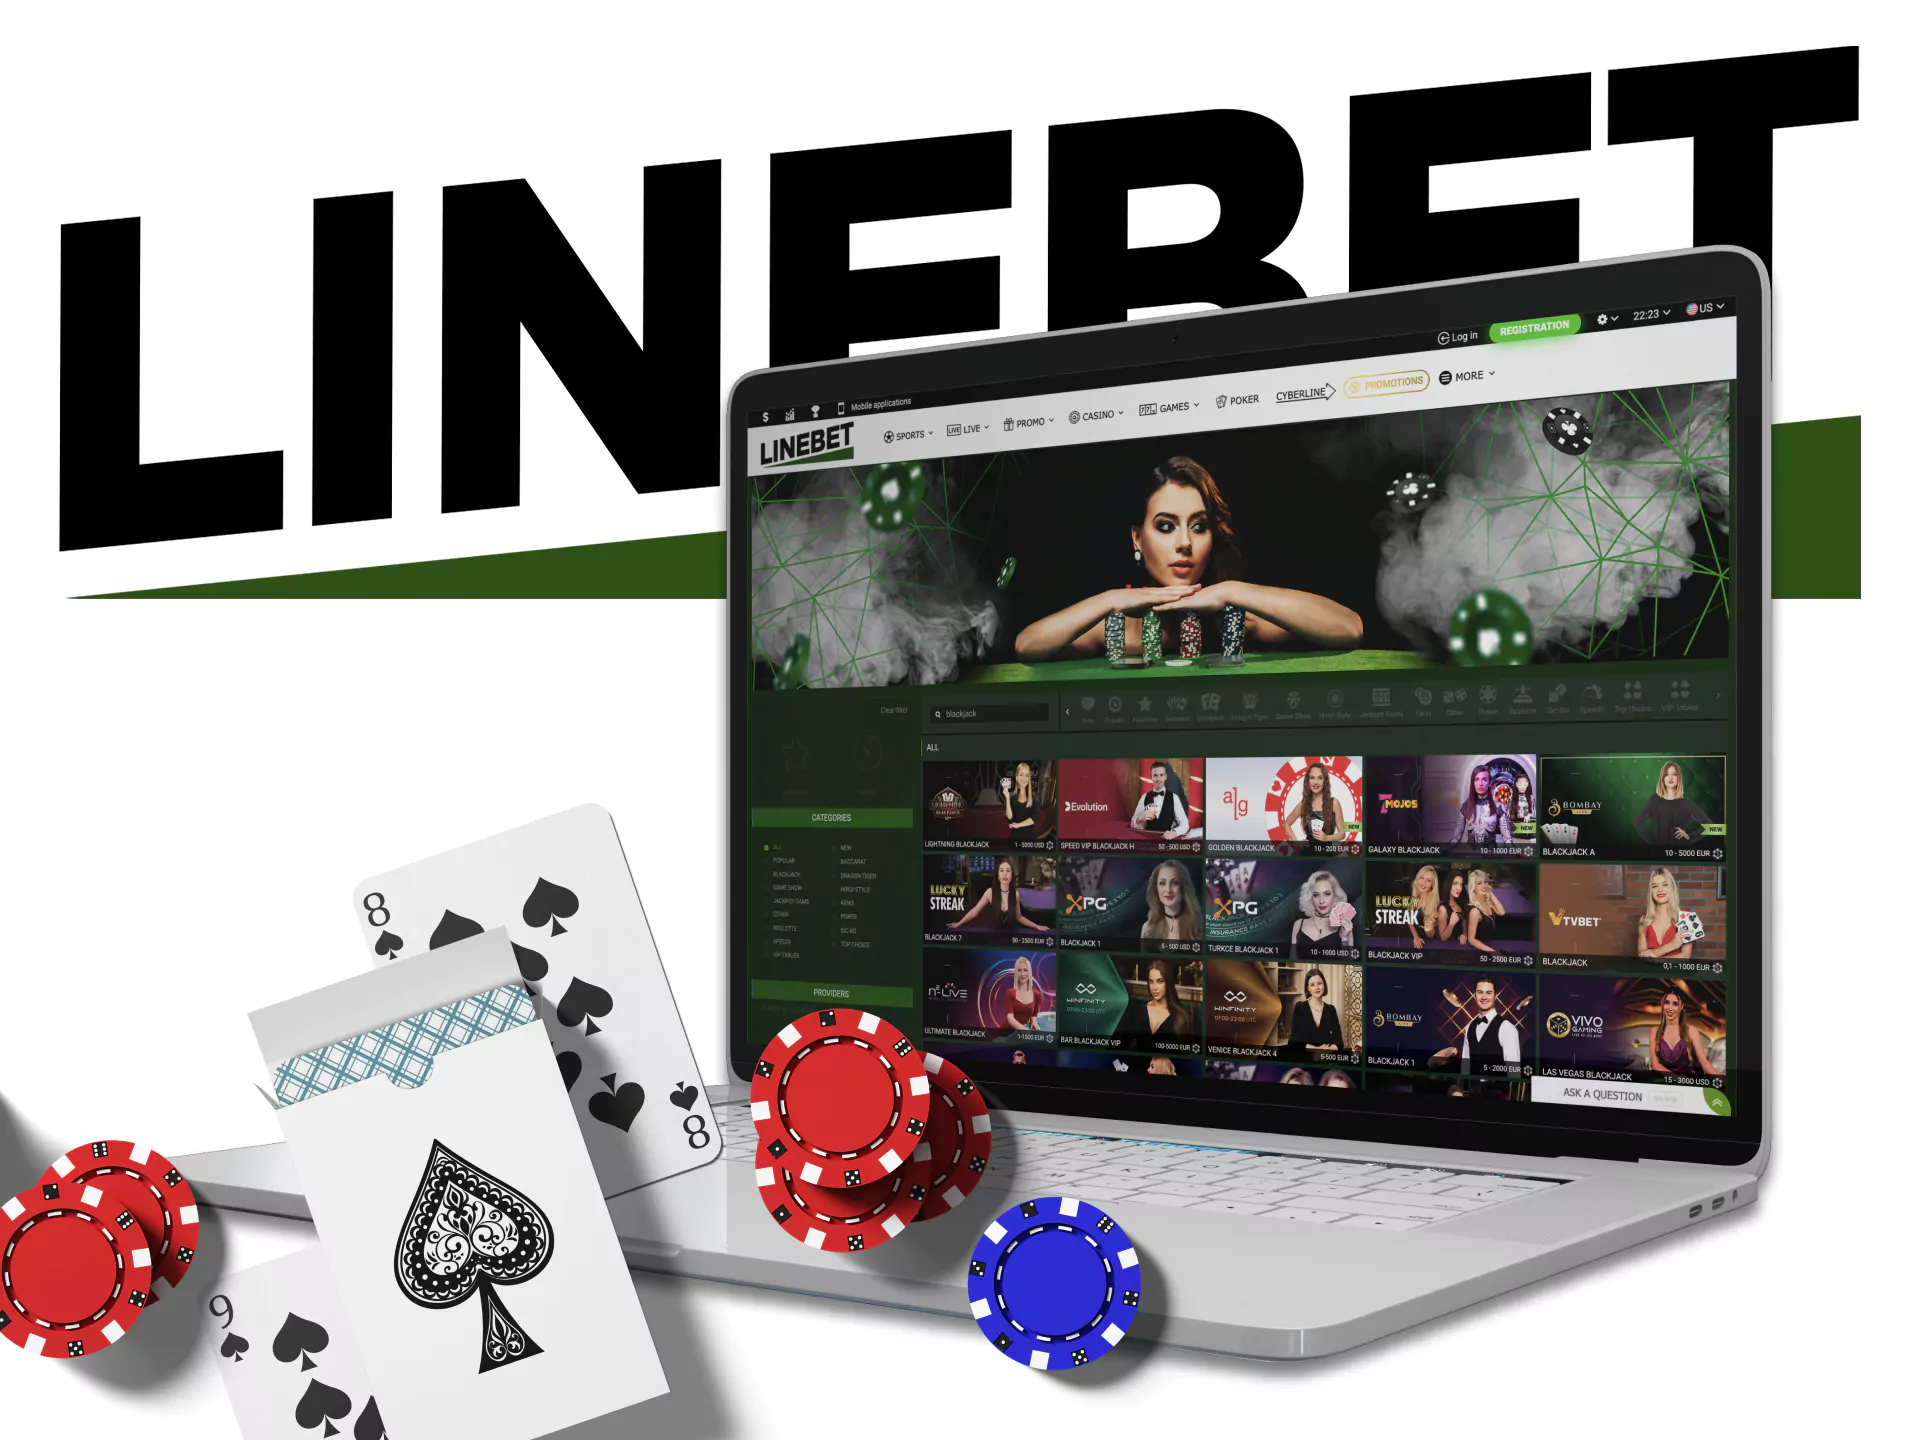 If you are a fan of card games, try blackjack on Linebet.